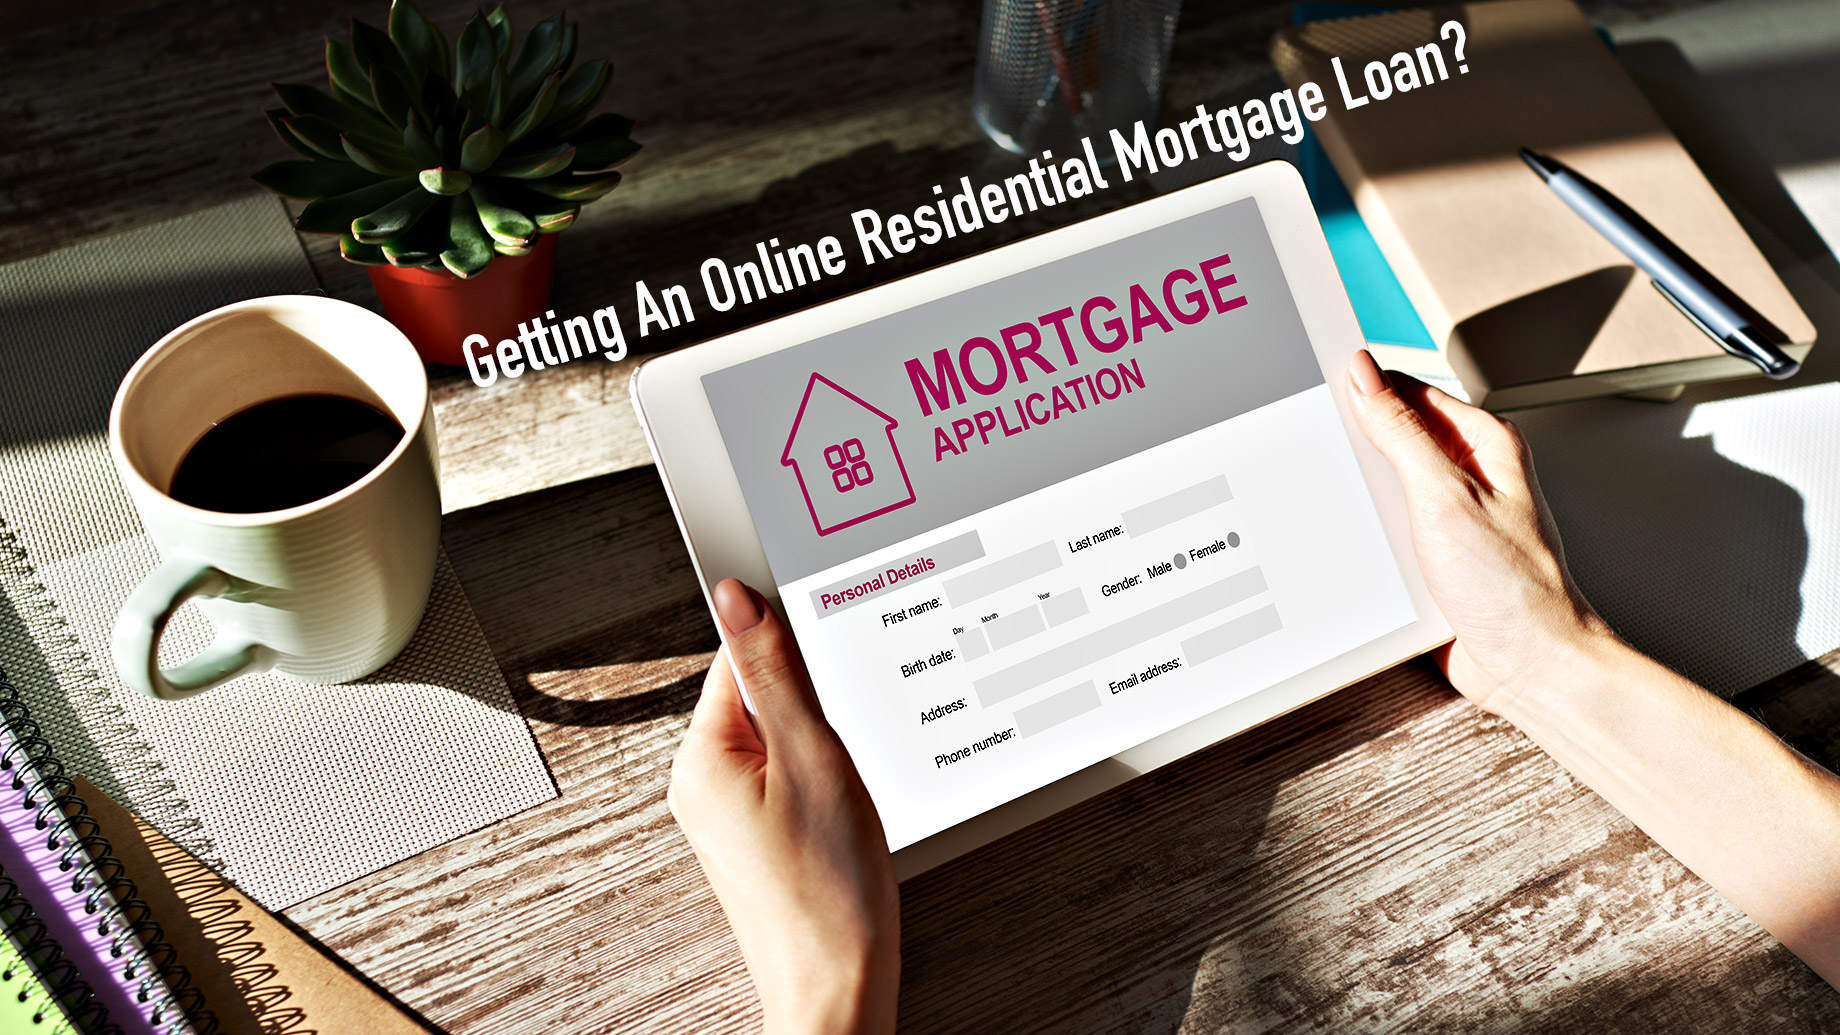 Getting An Online Residential Mortgage Loan?